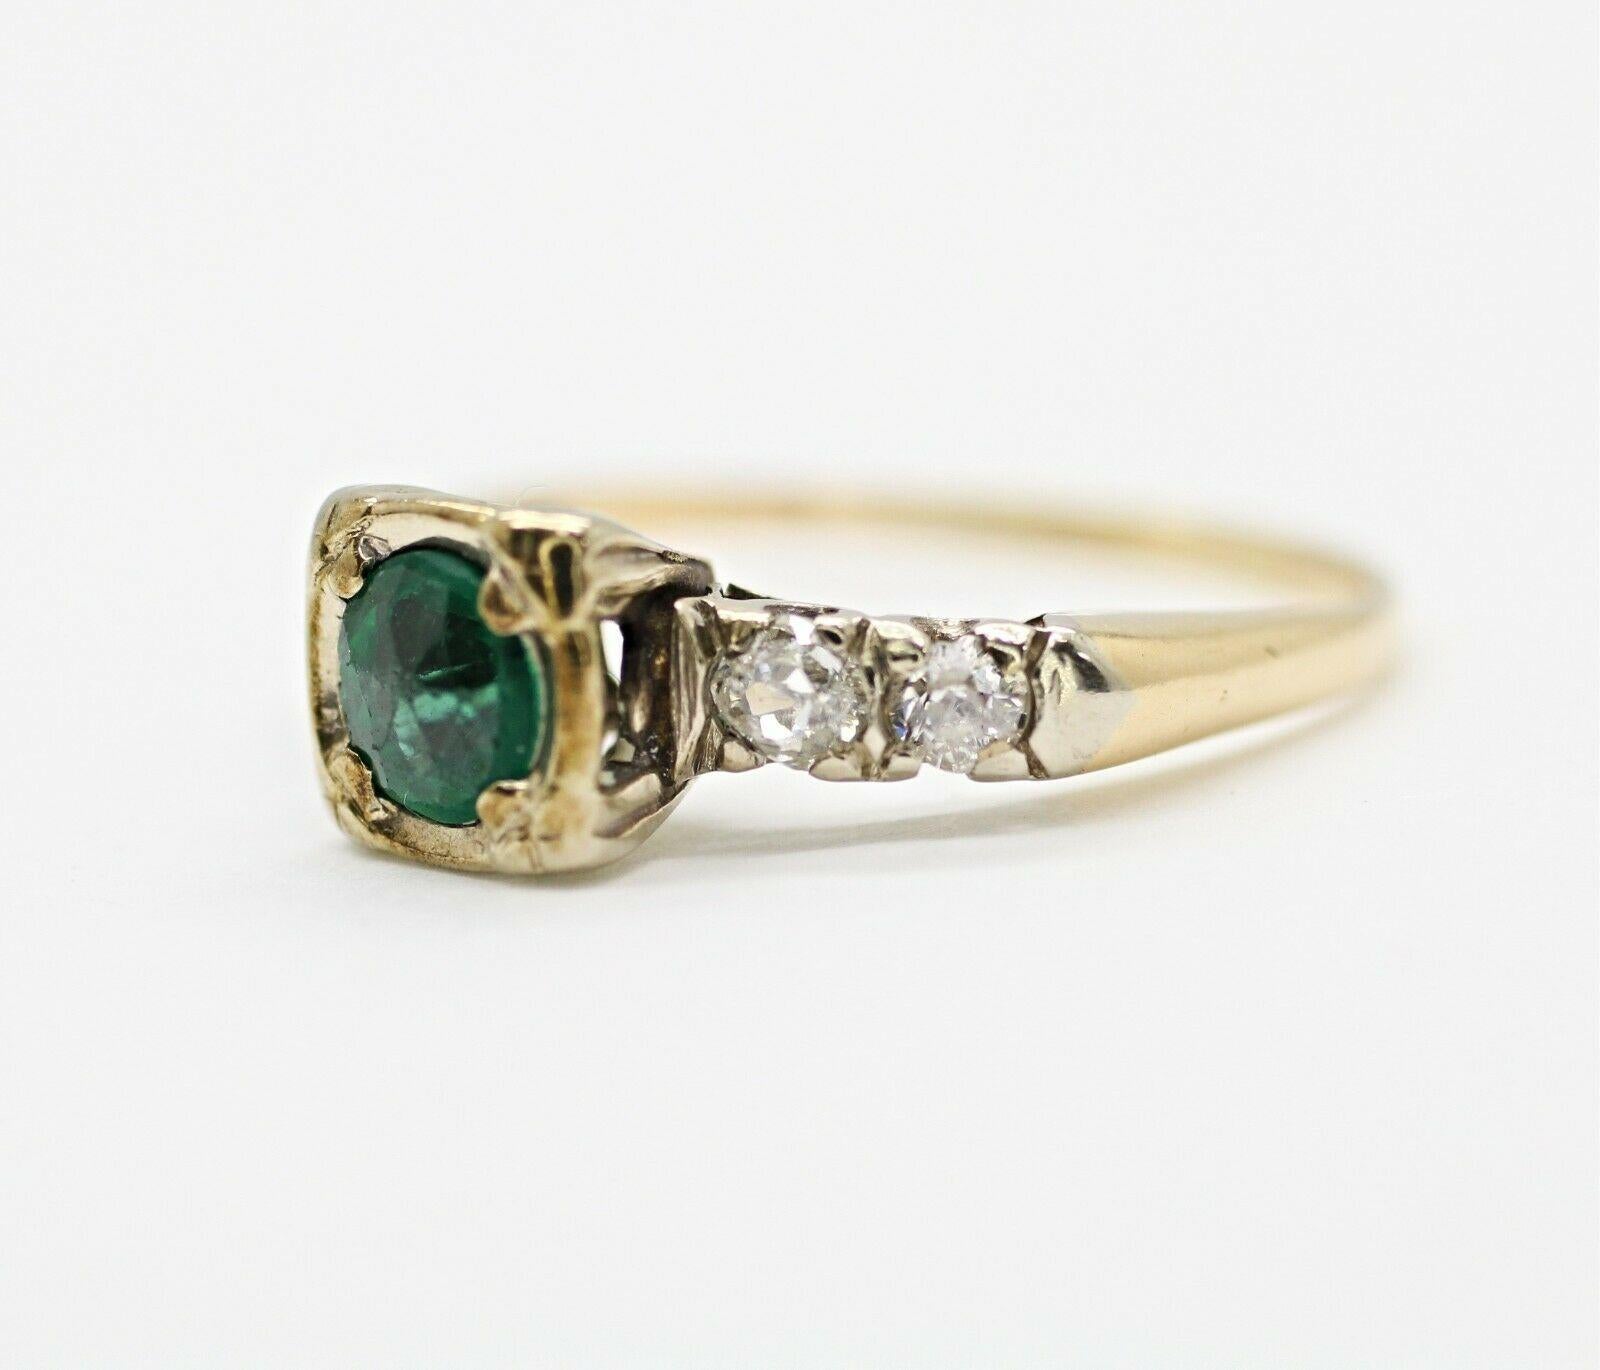  14k yellow gold emerald and diamond ring containing 
Specifications:
    main stone: 5.mm  round EMERALD OLD CUT 
    diamonds: 4 PIECES ROUND DIAMONDS
    carat total weight: 0.26
    color: H
    clarity: SI2
    brand: UNBRANDED
    metal: 14K